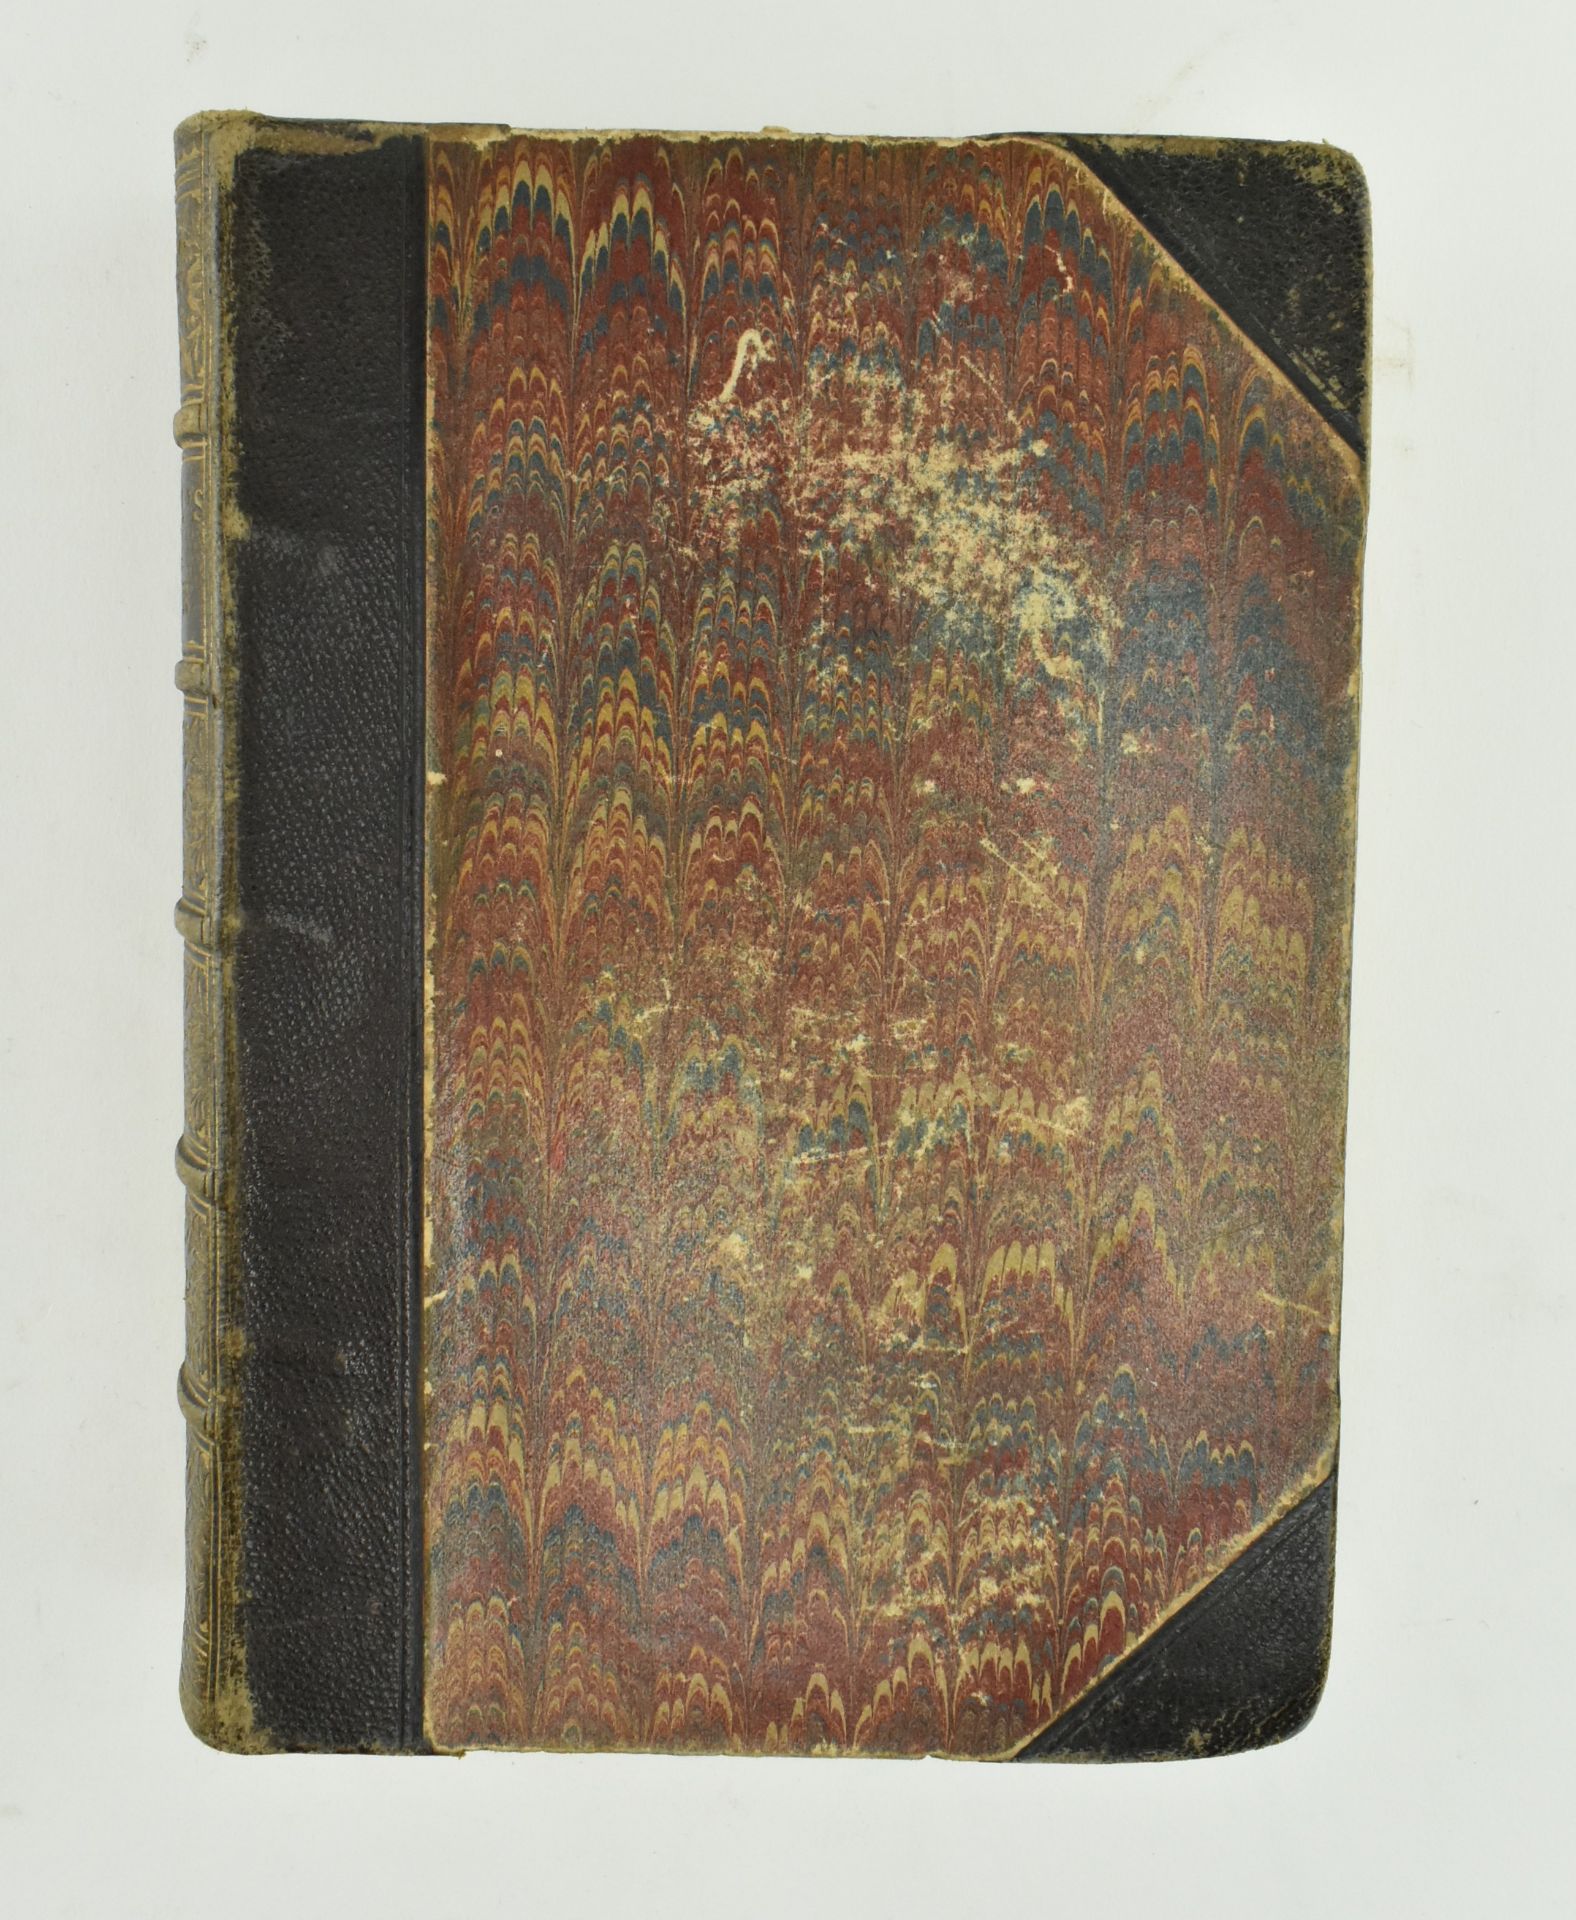 BINDINGS. COLLECTION OF VICTORIAN & LATER GILT LEATHER BINDINGS - Image 6 of 9